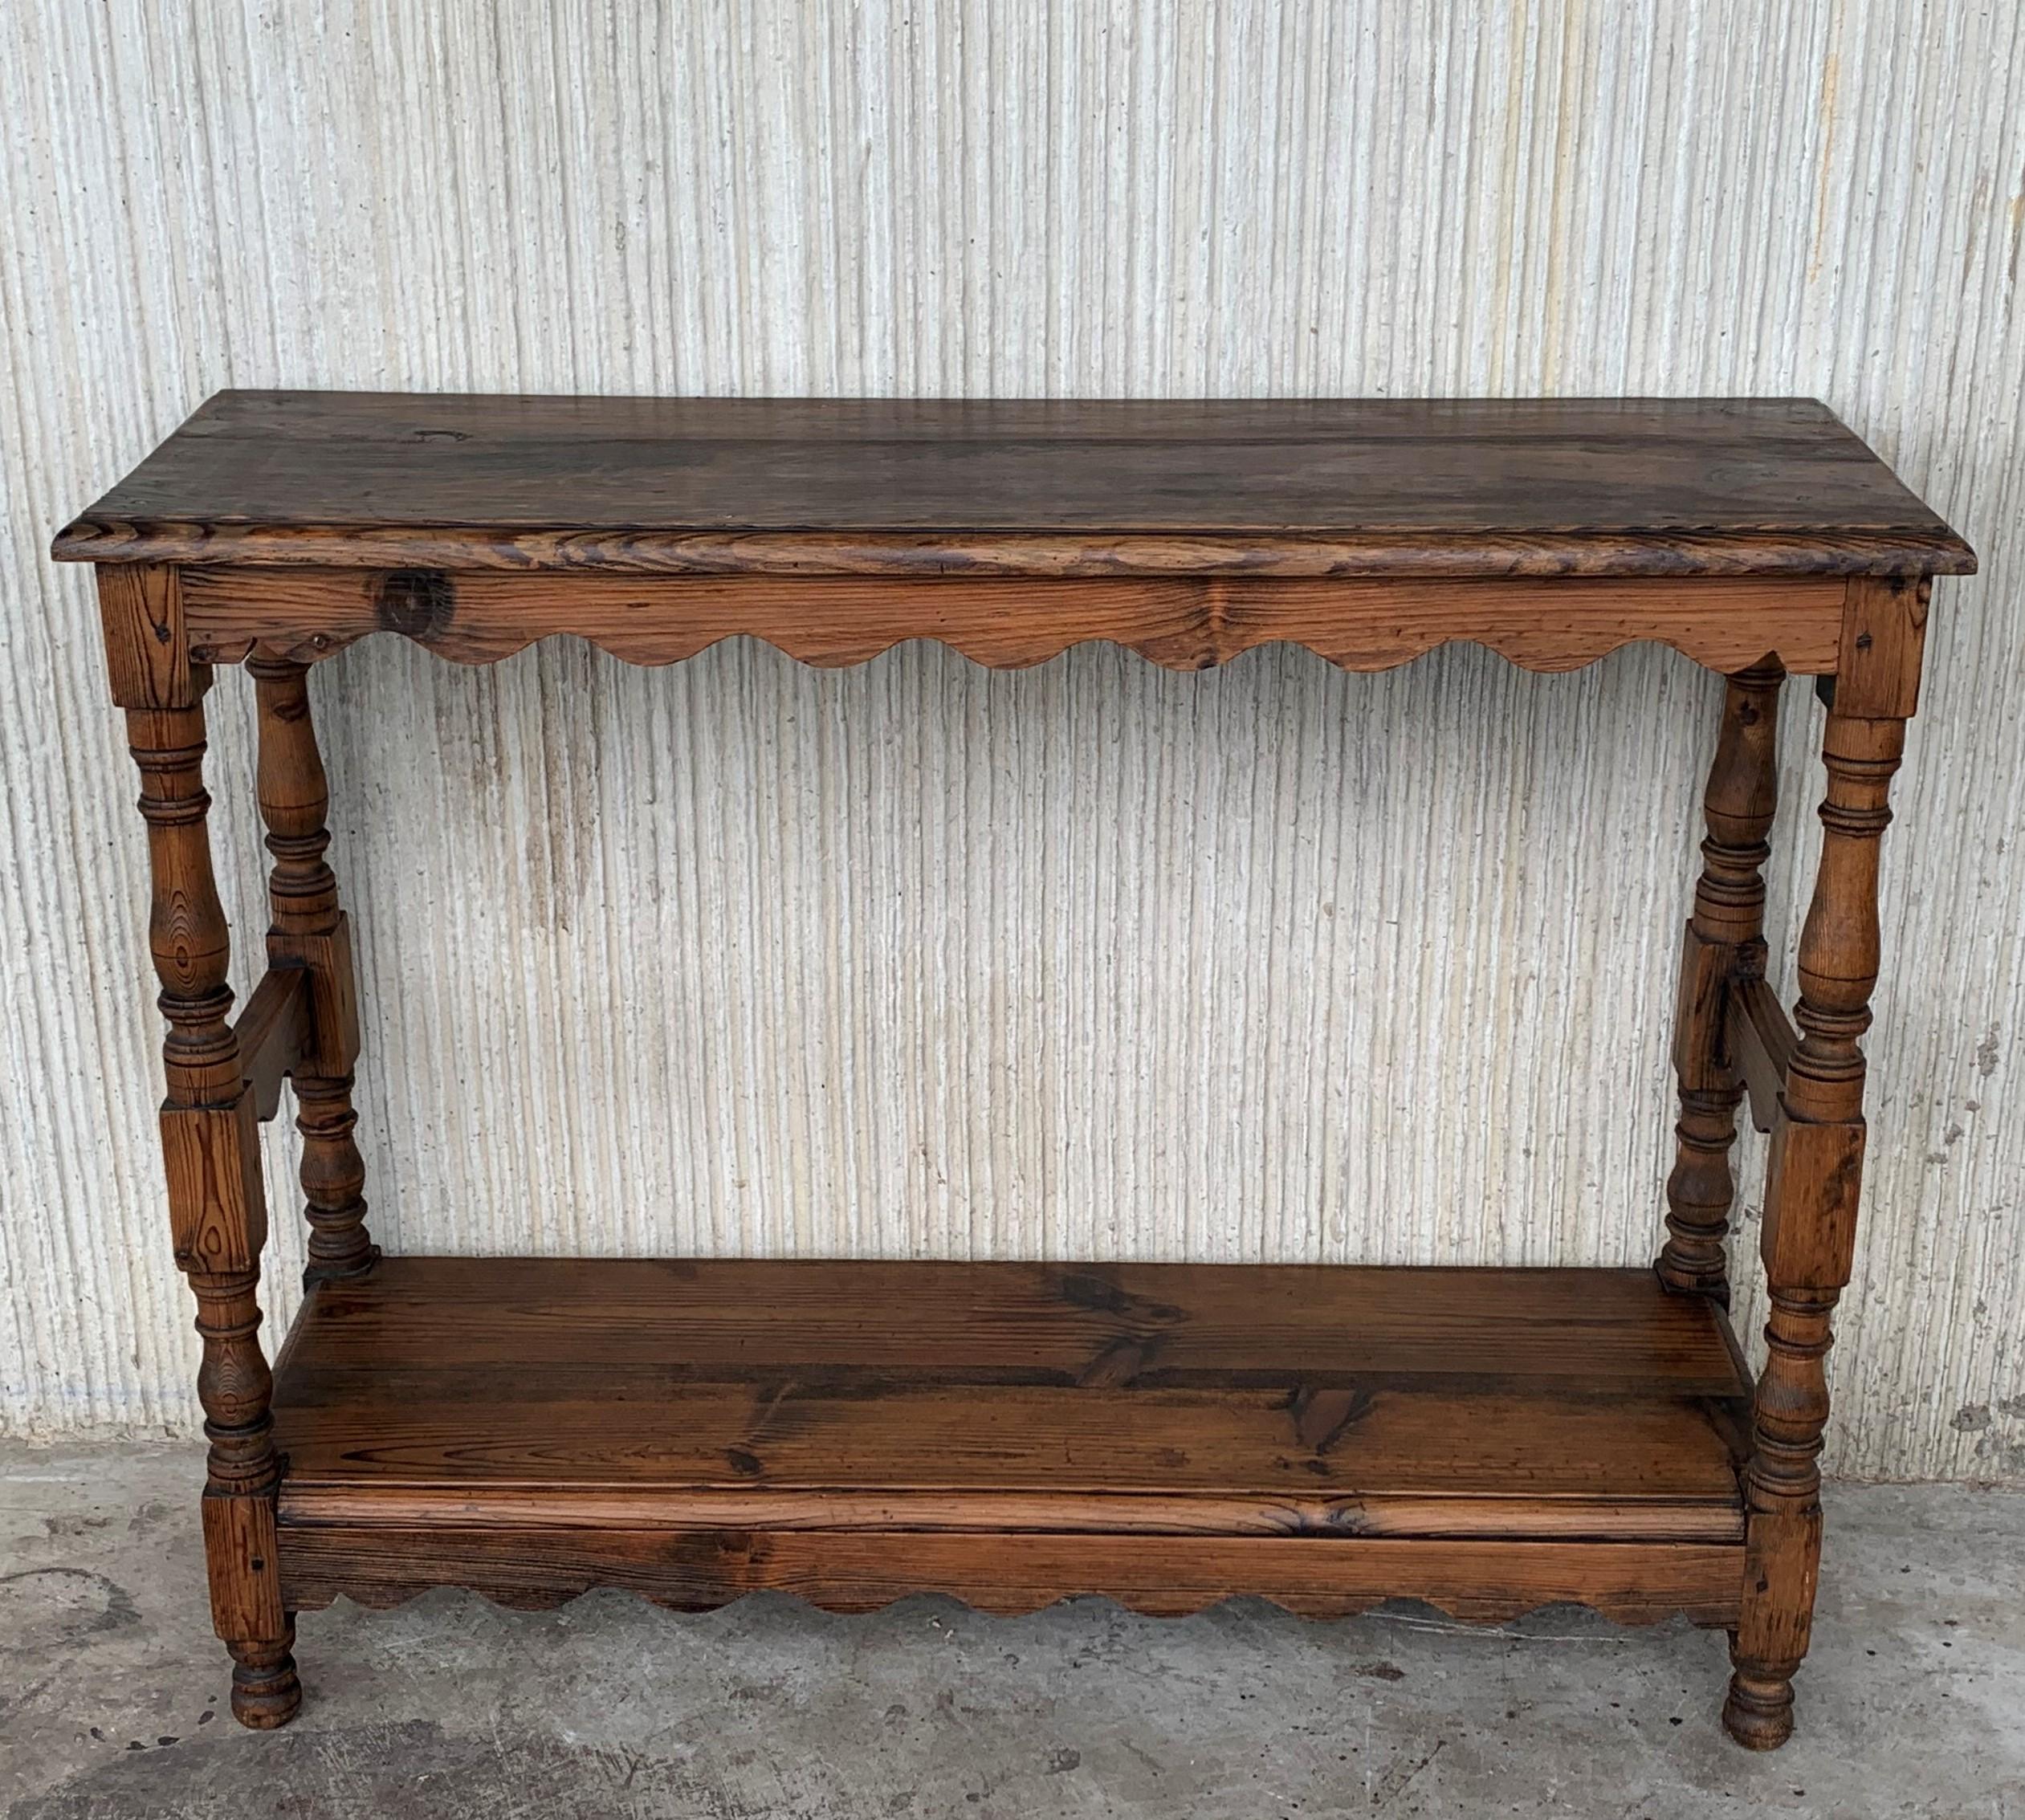 French Provincial Country French Two-Tier Console Table in Old Pine